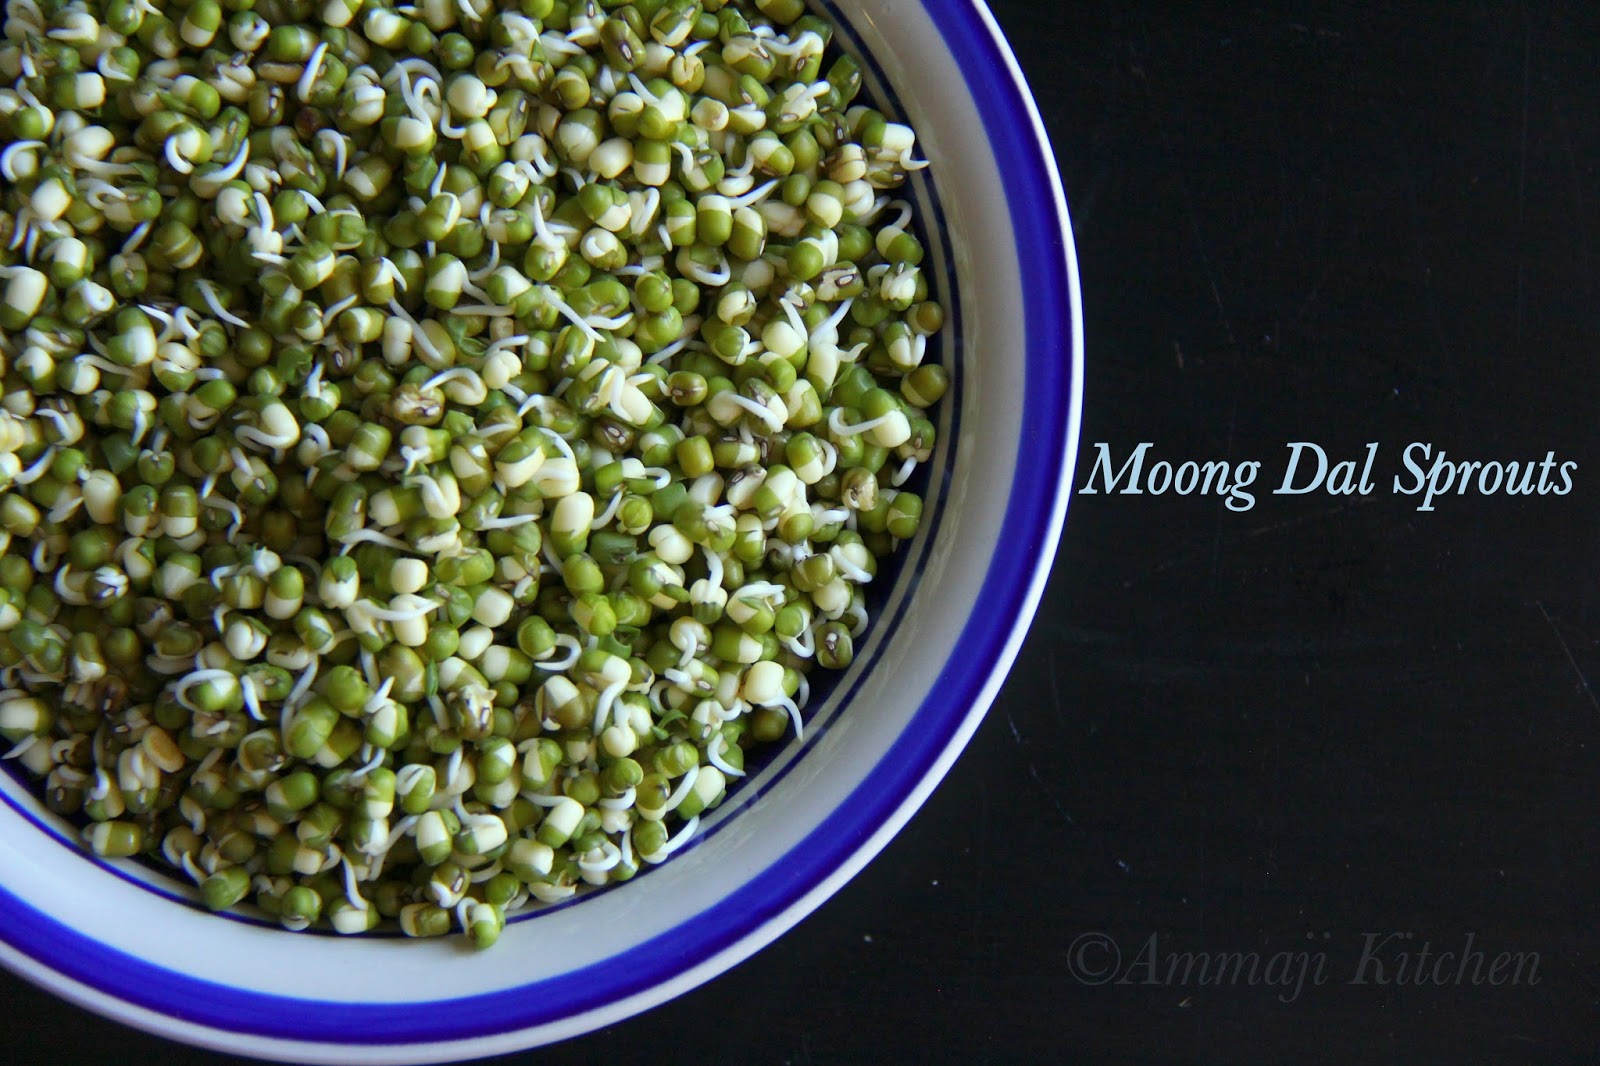 Moong Dal Sprouts | How to make Moong Dal Sprouts ? | Indian Food Recipes | Ammaji Kitchen